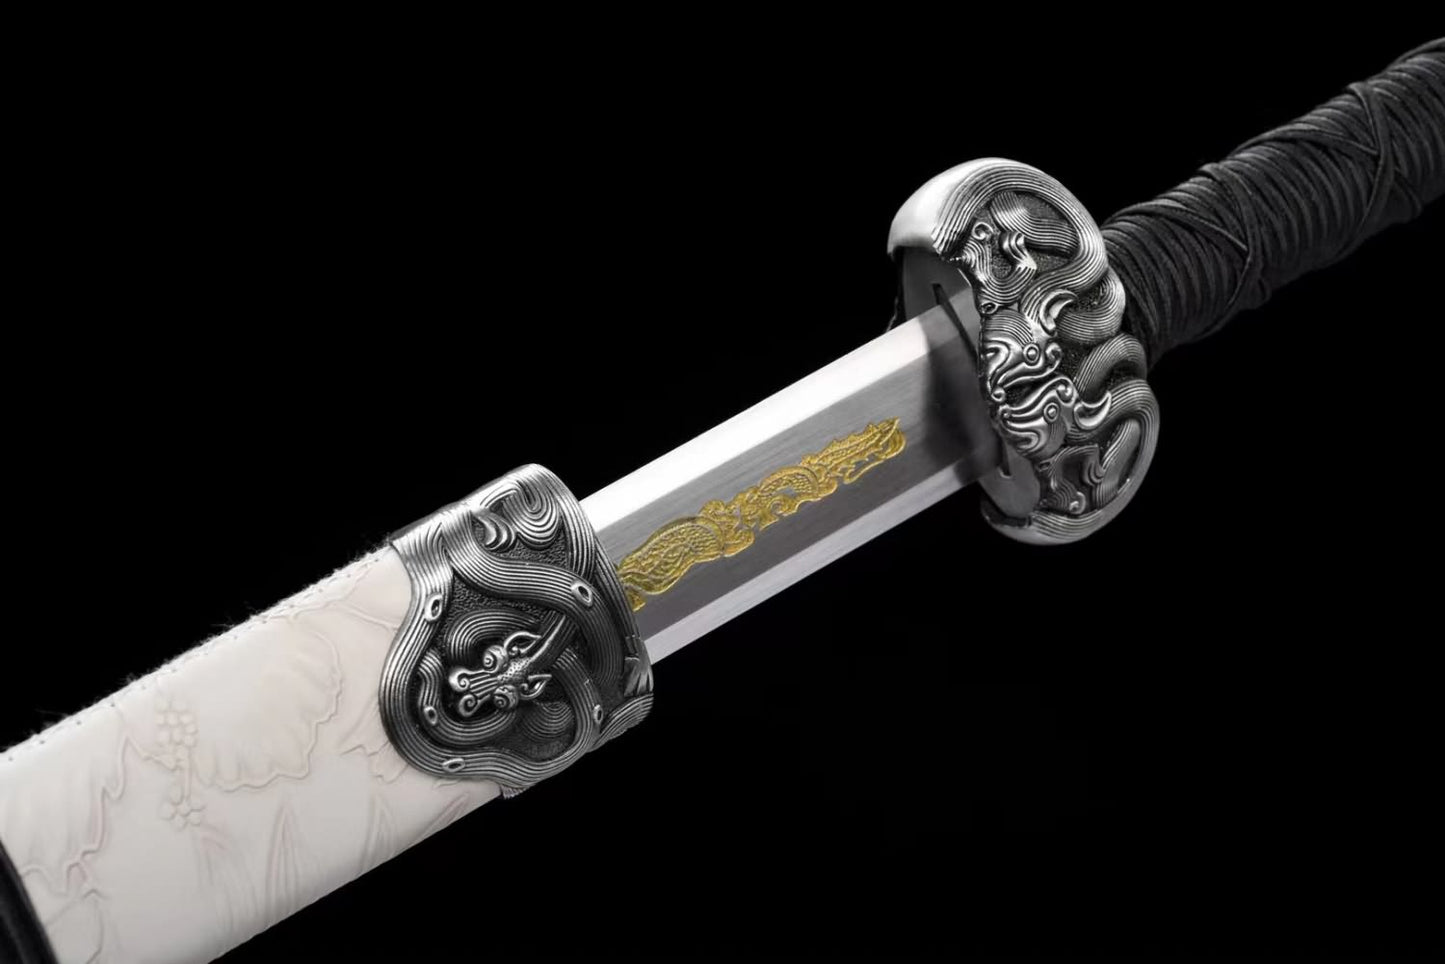 Han jian Sword Forged High Carbon Steel Etched Blade,Alloy Fittings,White Leather